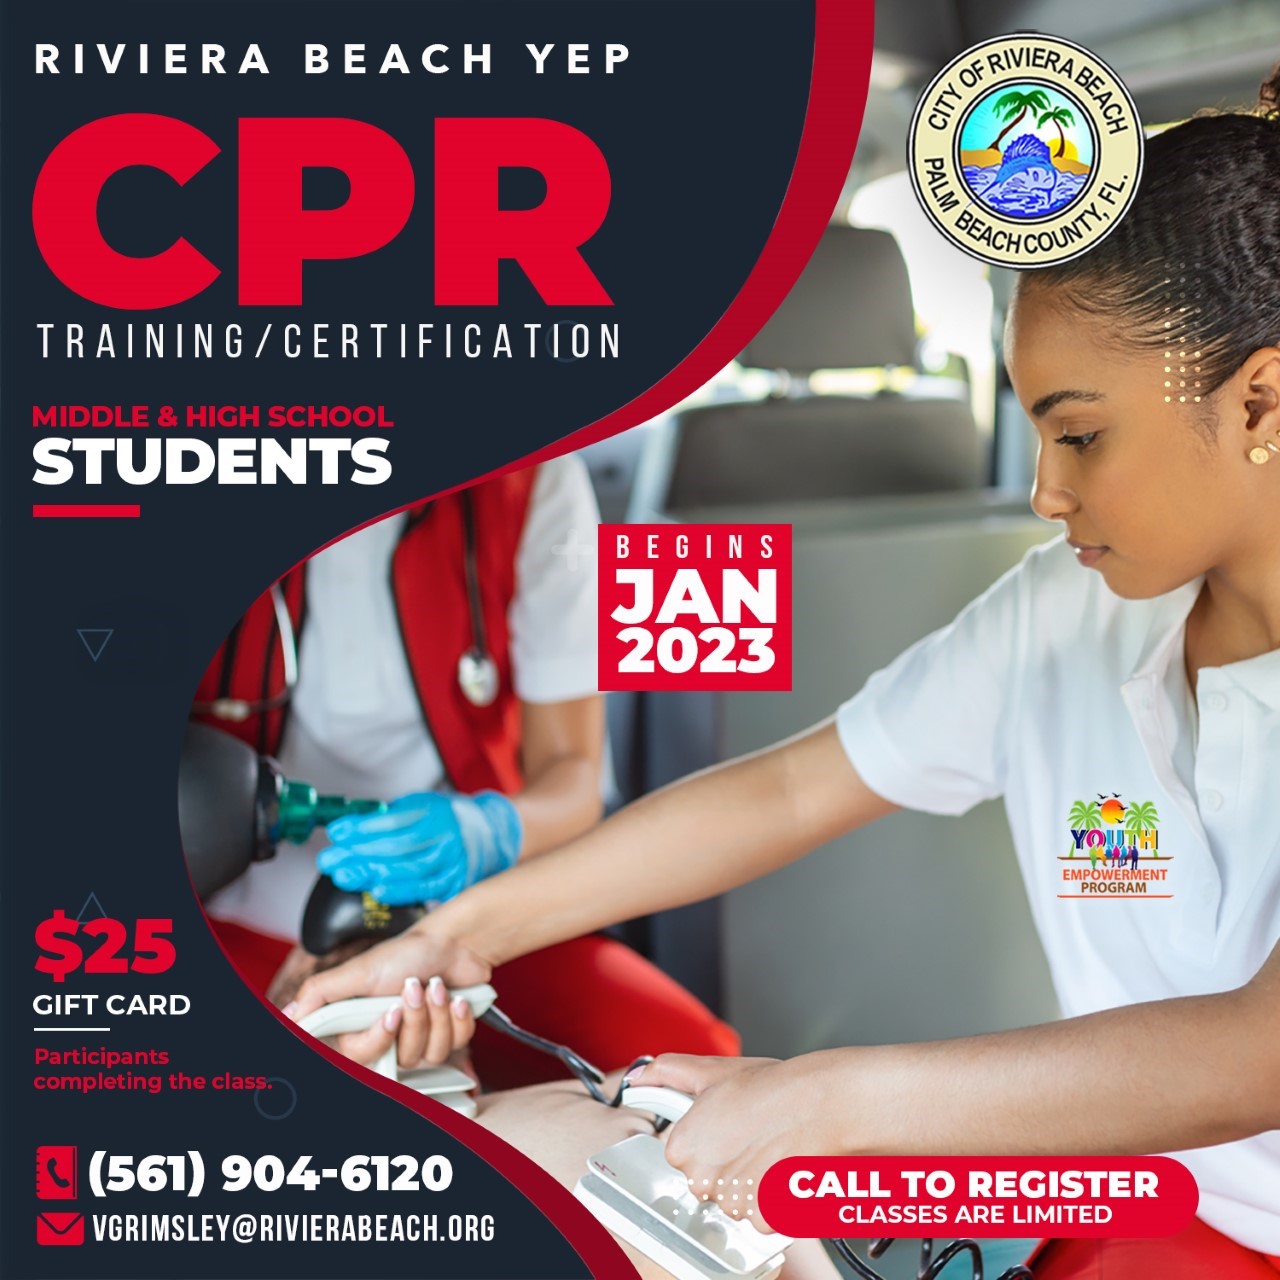 RIVIERA BEACH YEP CPR TRAINING/CERTIFICATION MIDDLE & HIGH SCHOOL STUDENTS GENERARGE CITY BEGINS JAN 2023 EMPOWERMENI PROGRAM $25 GIFT CARD Participants completing the class. C (561) 904-6120 VGRIMSLEY@RIVIERABEACH.ORG